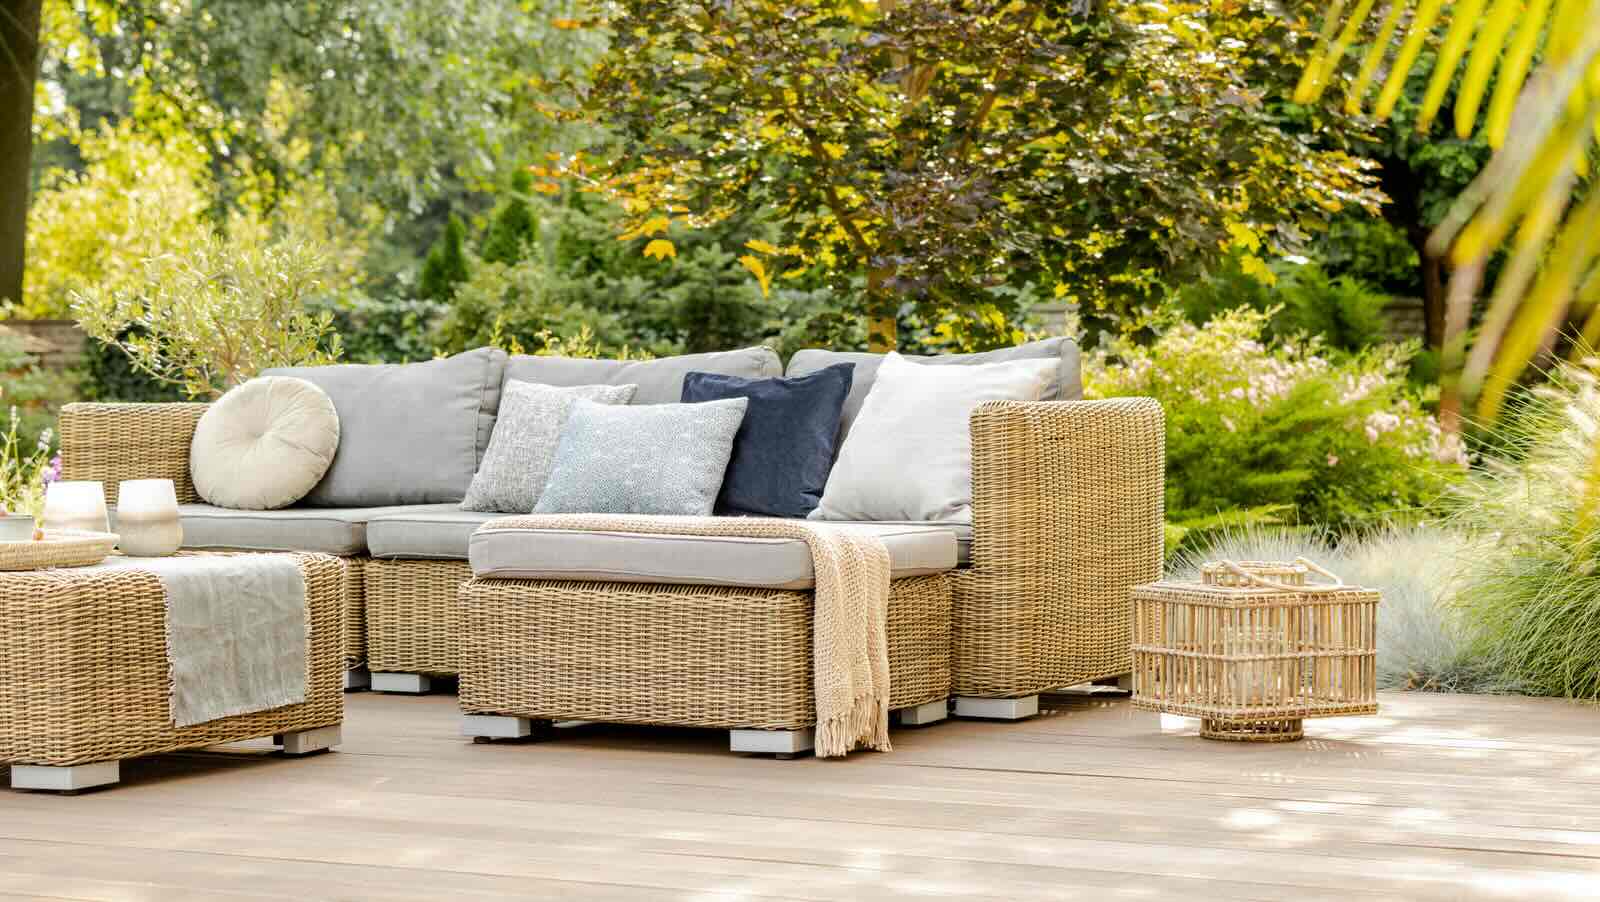 How To Keep Outdoor Cushions In Place